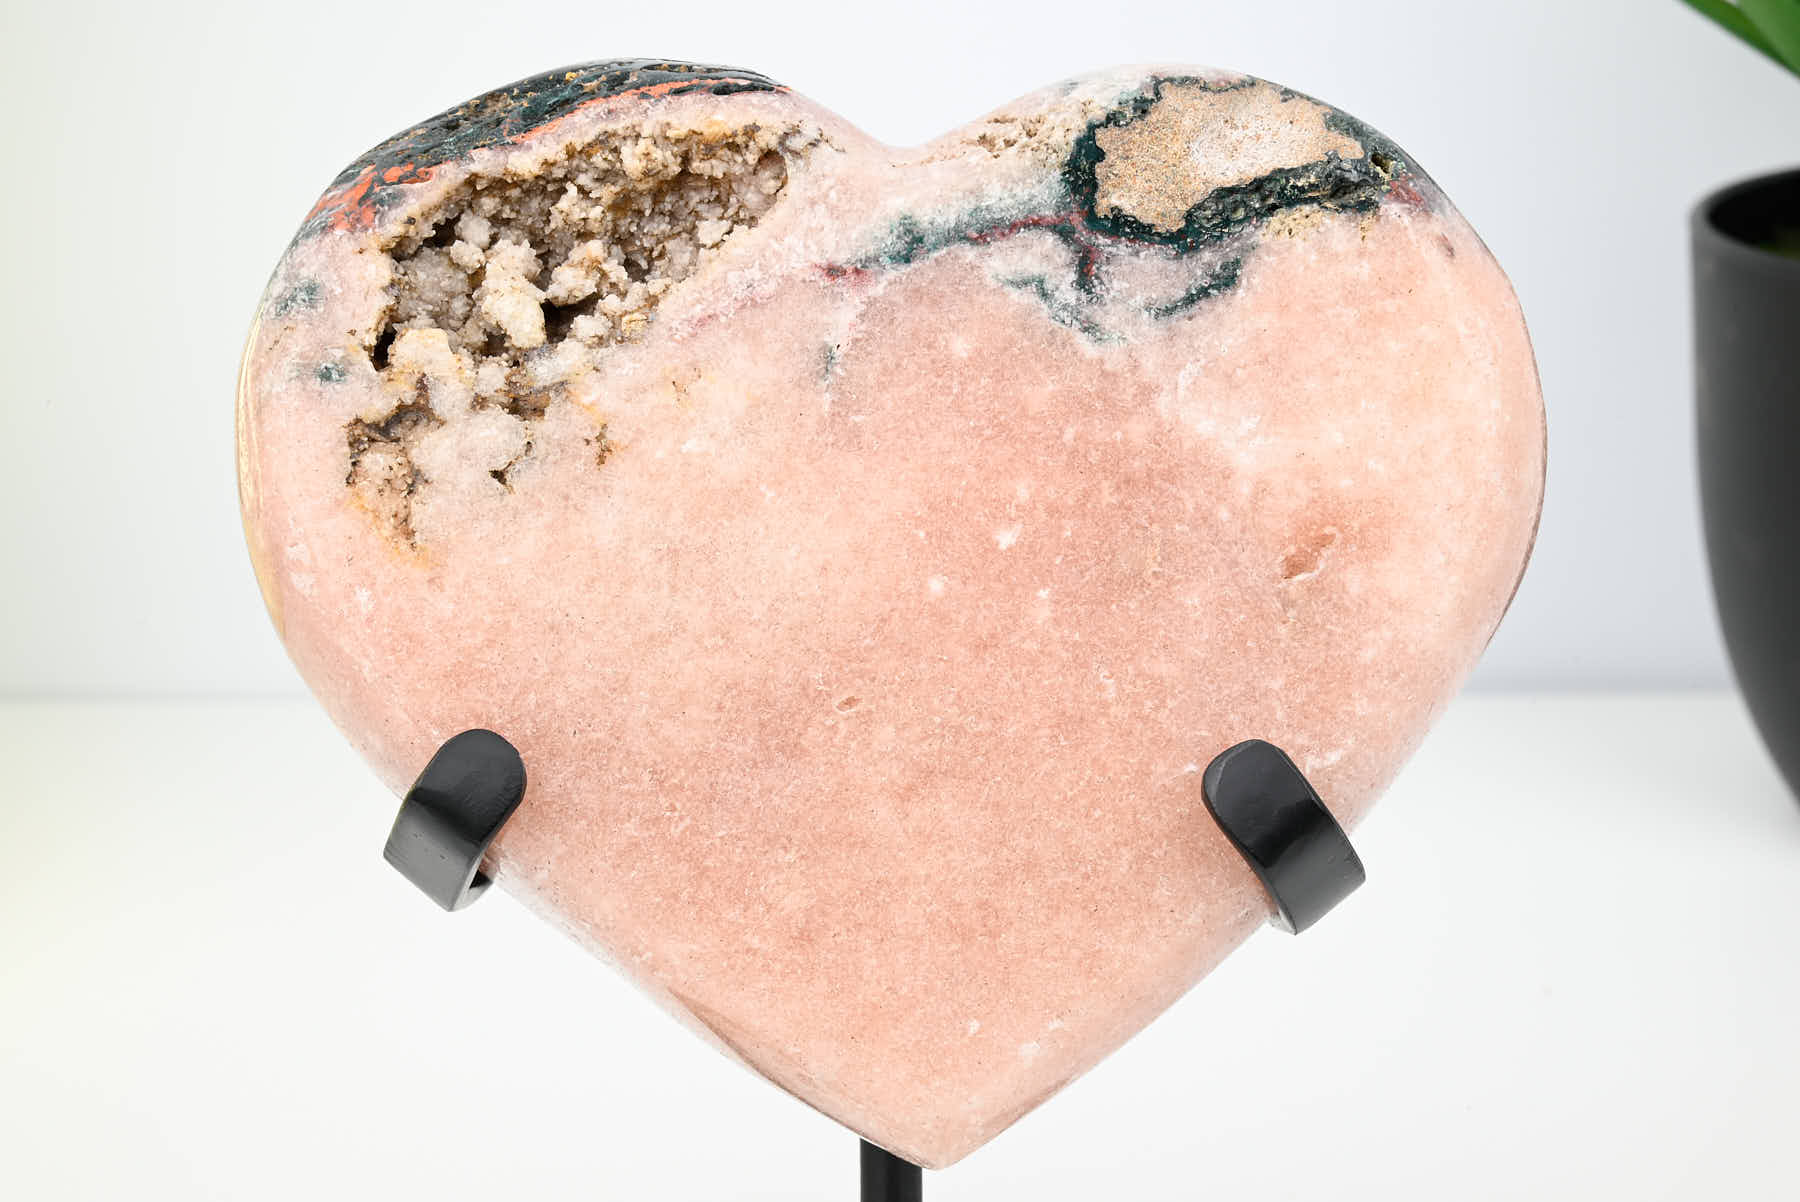 Extra Quality Pink Amethyst Heart - 1.26kg, 15cm high - #HTPINK-34031